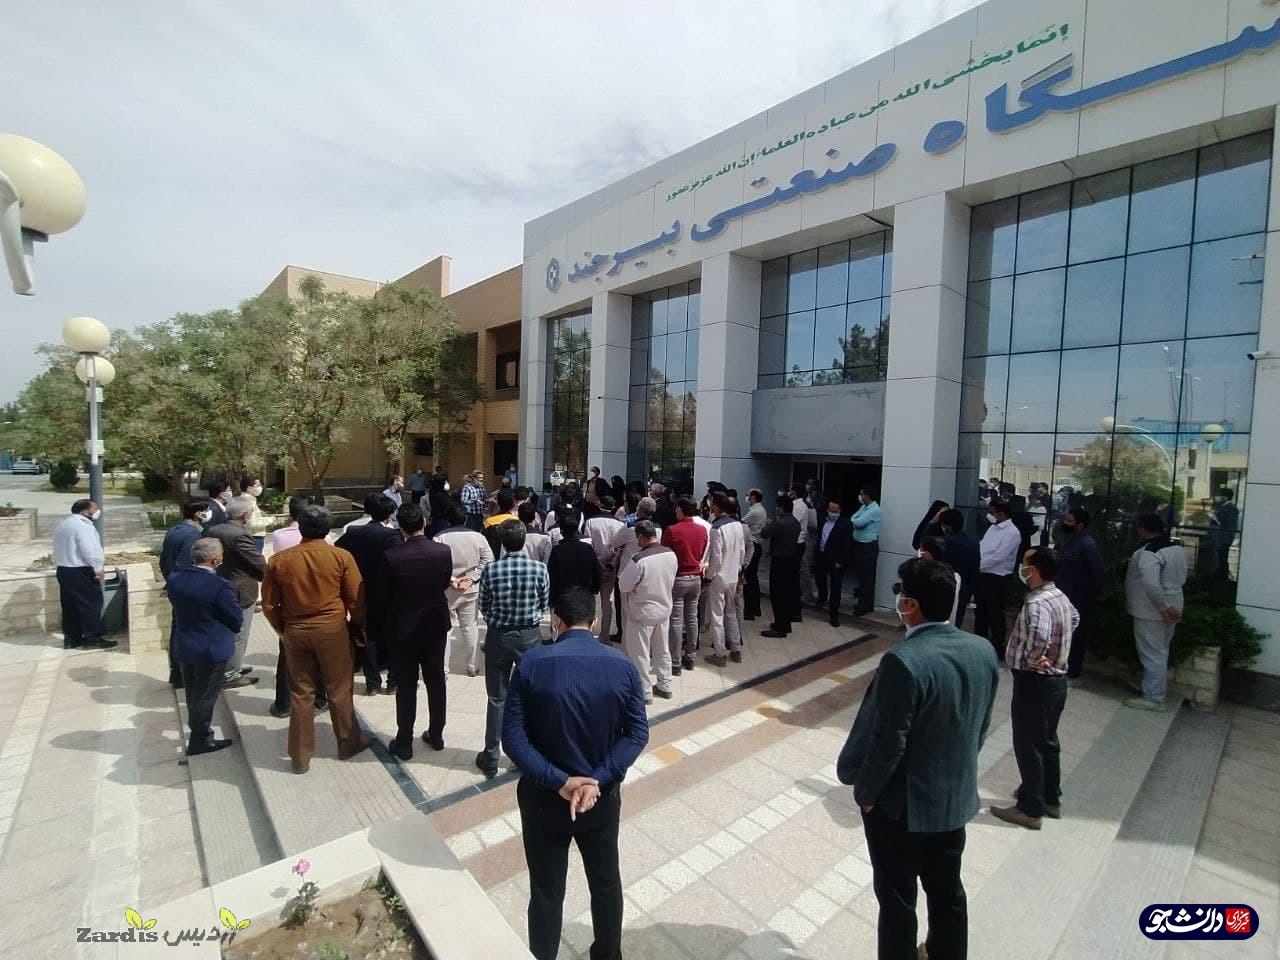 Higher education planning plan in South Khorasan is still in ambiguity / Why does the Ministry of Science not open the way for dialogue?_thumbnail